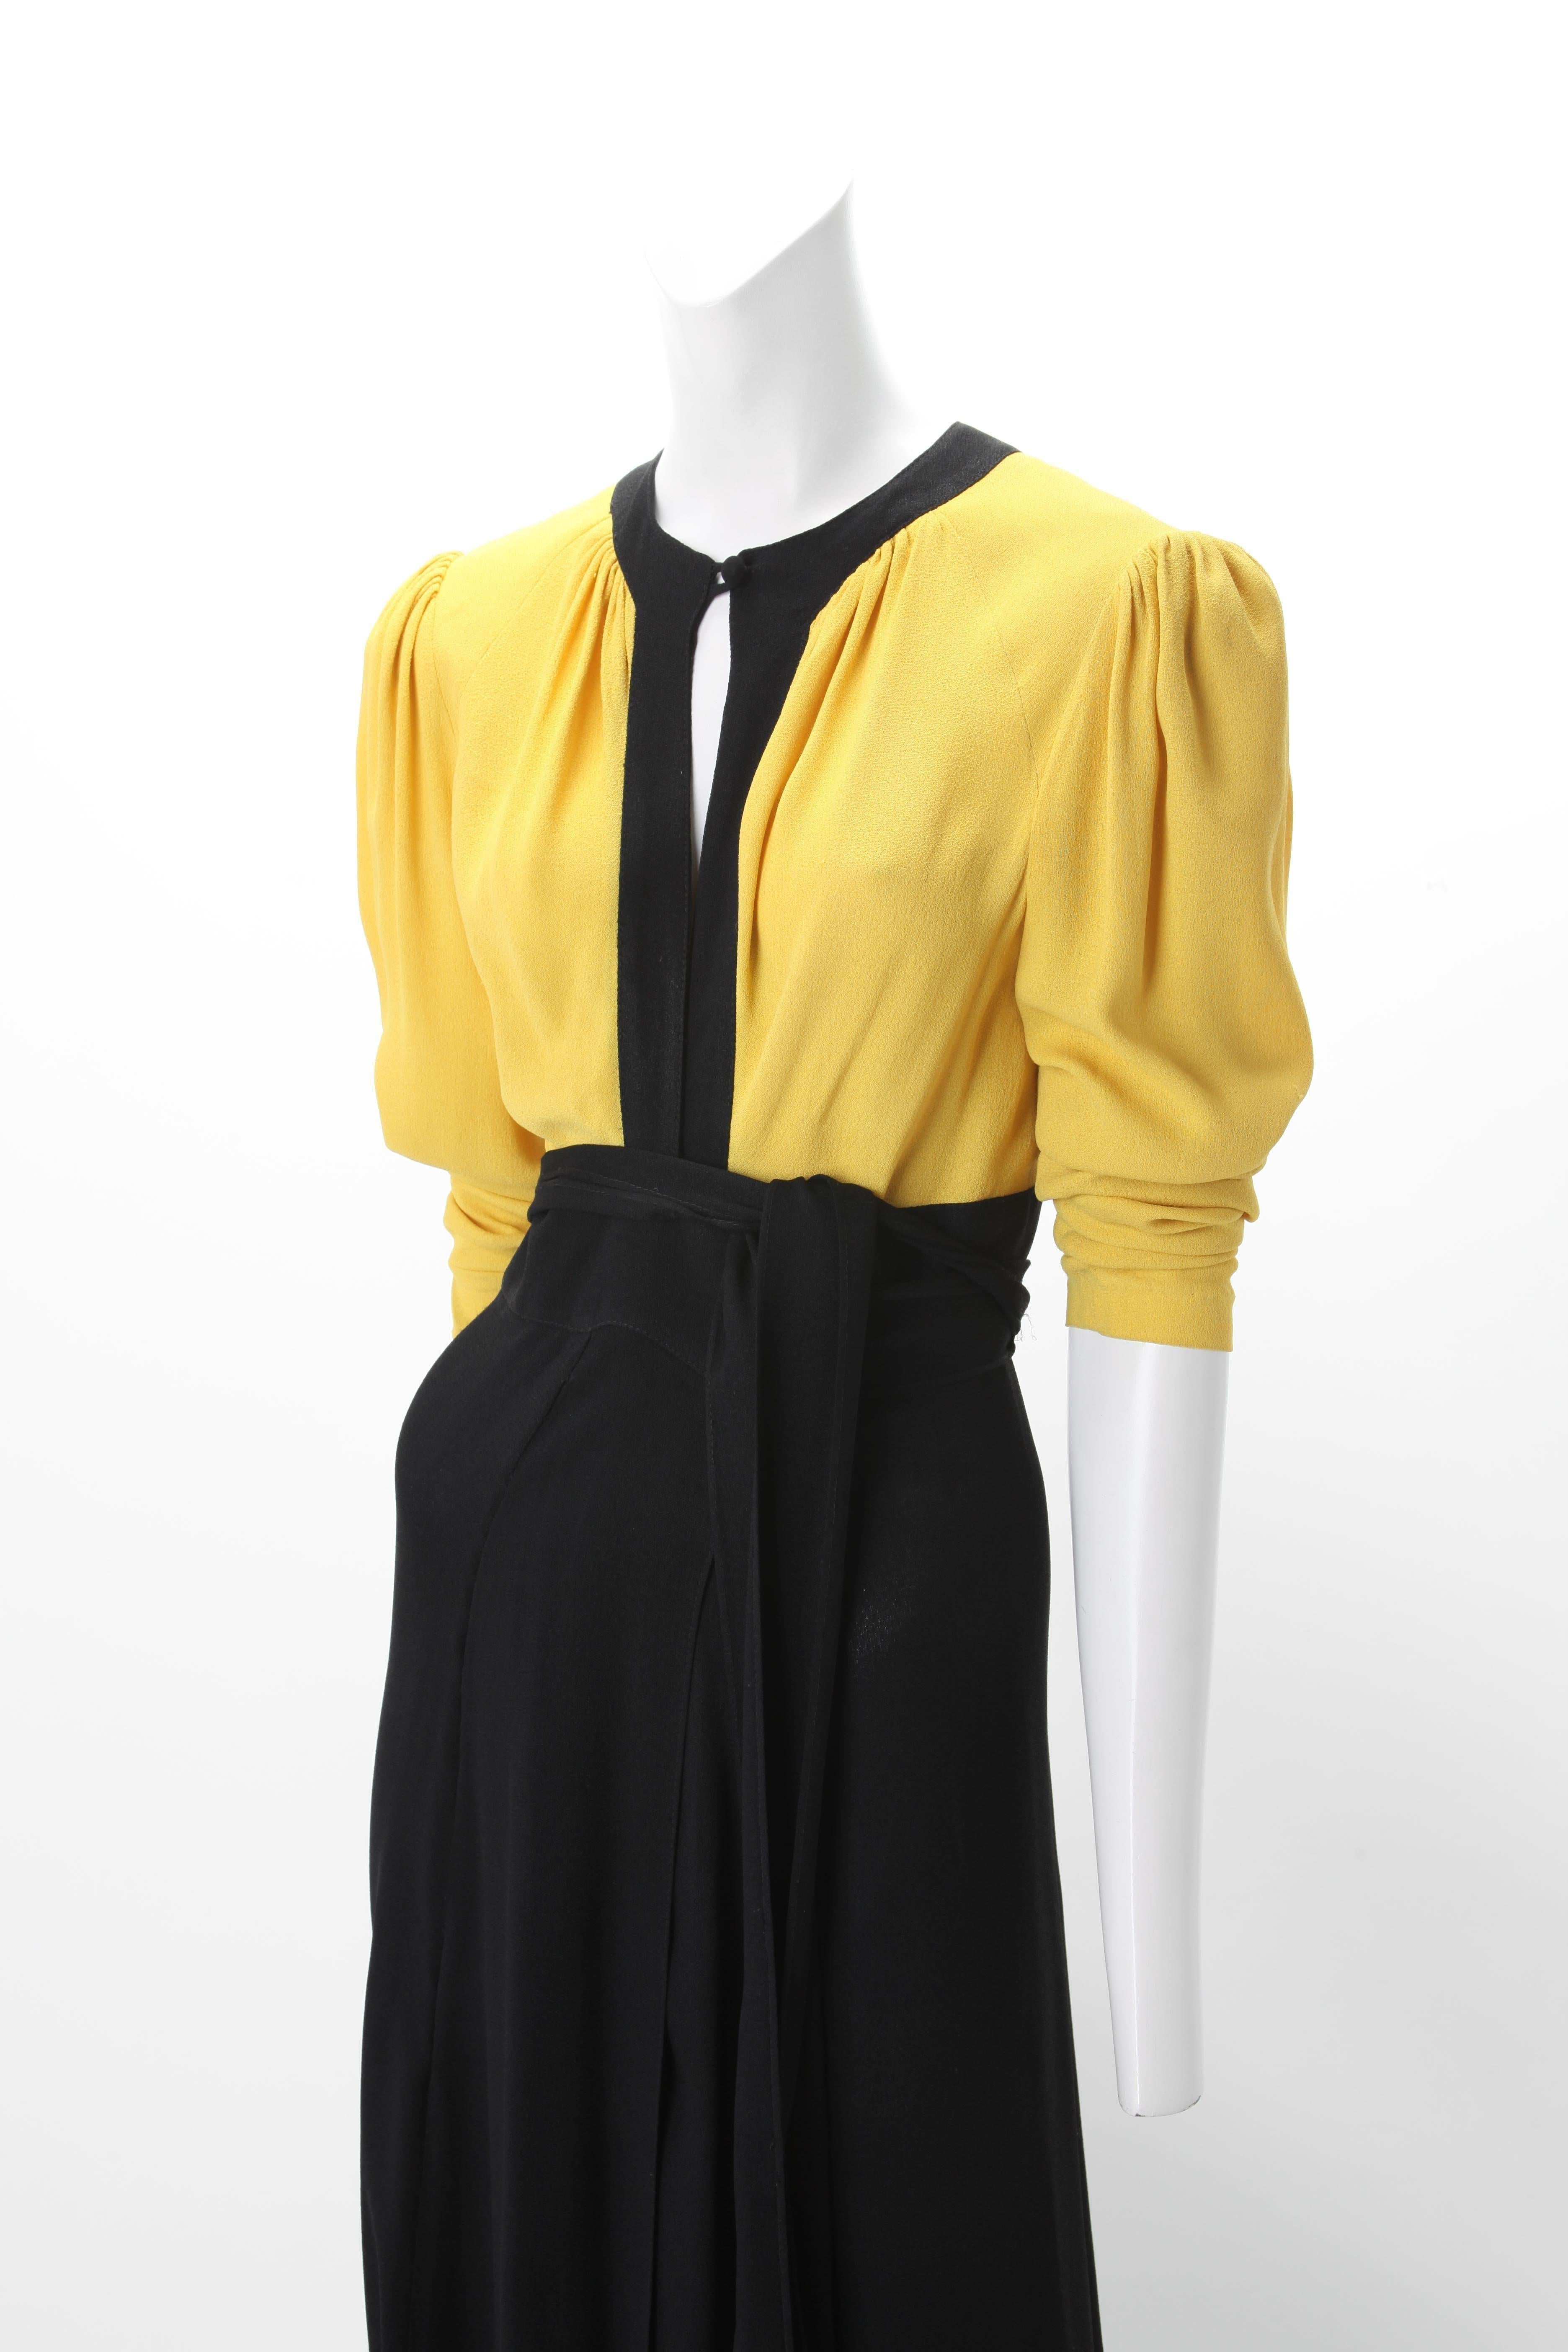 Ossie Clark Moss Crepe Wrap Dress c. 1970s UK 38; Black and Yellow Color Block Wrap Dress with Self Ties; Rouleau Button at front and back neckline.